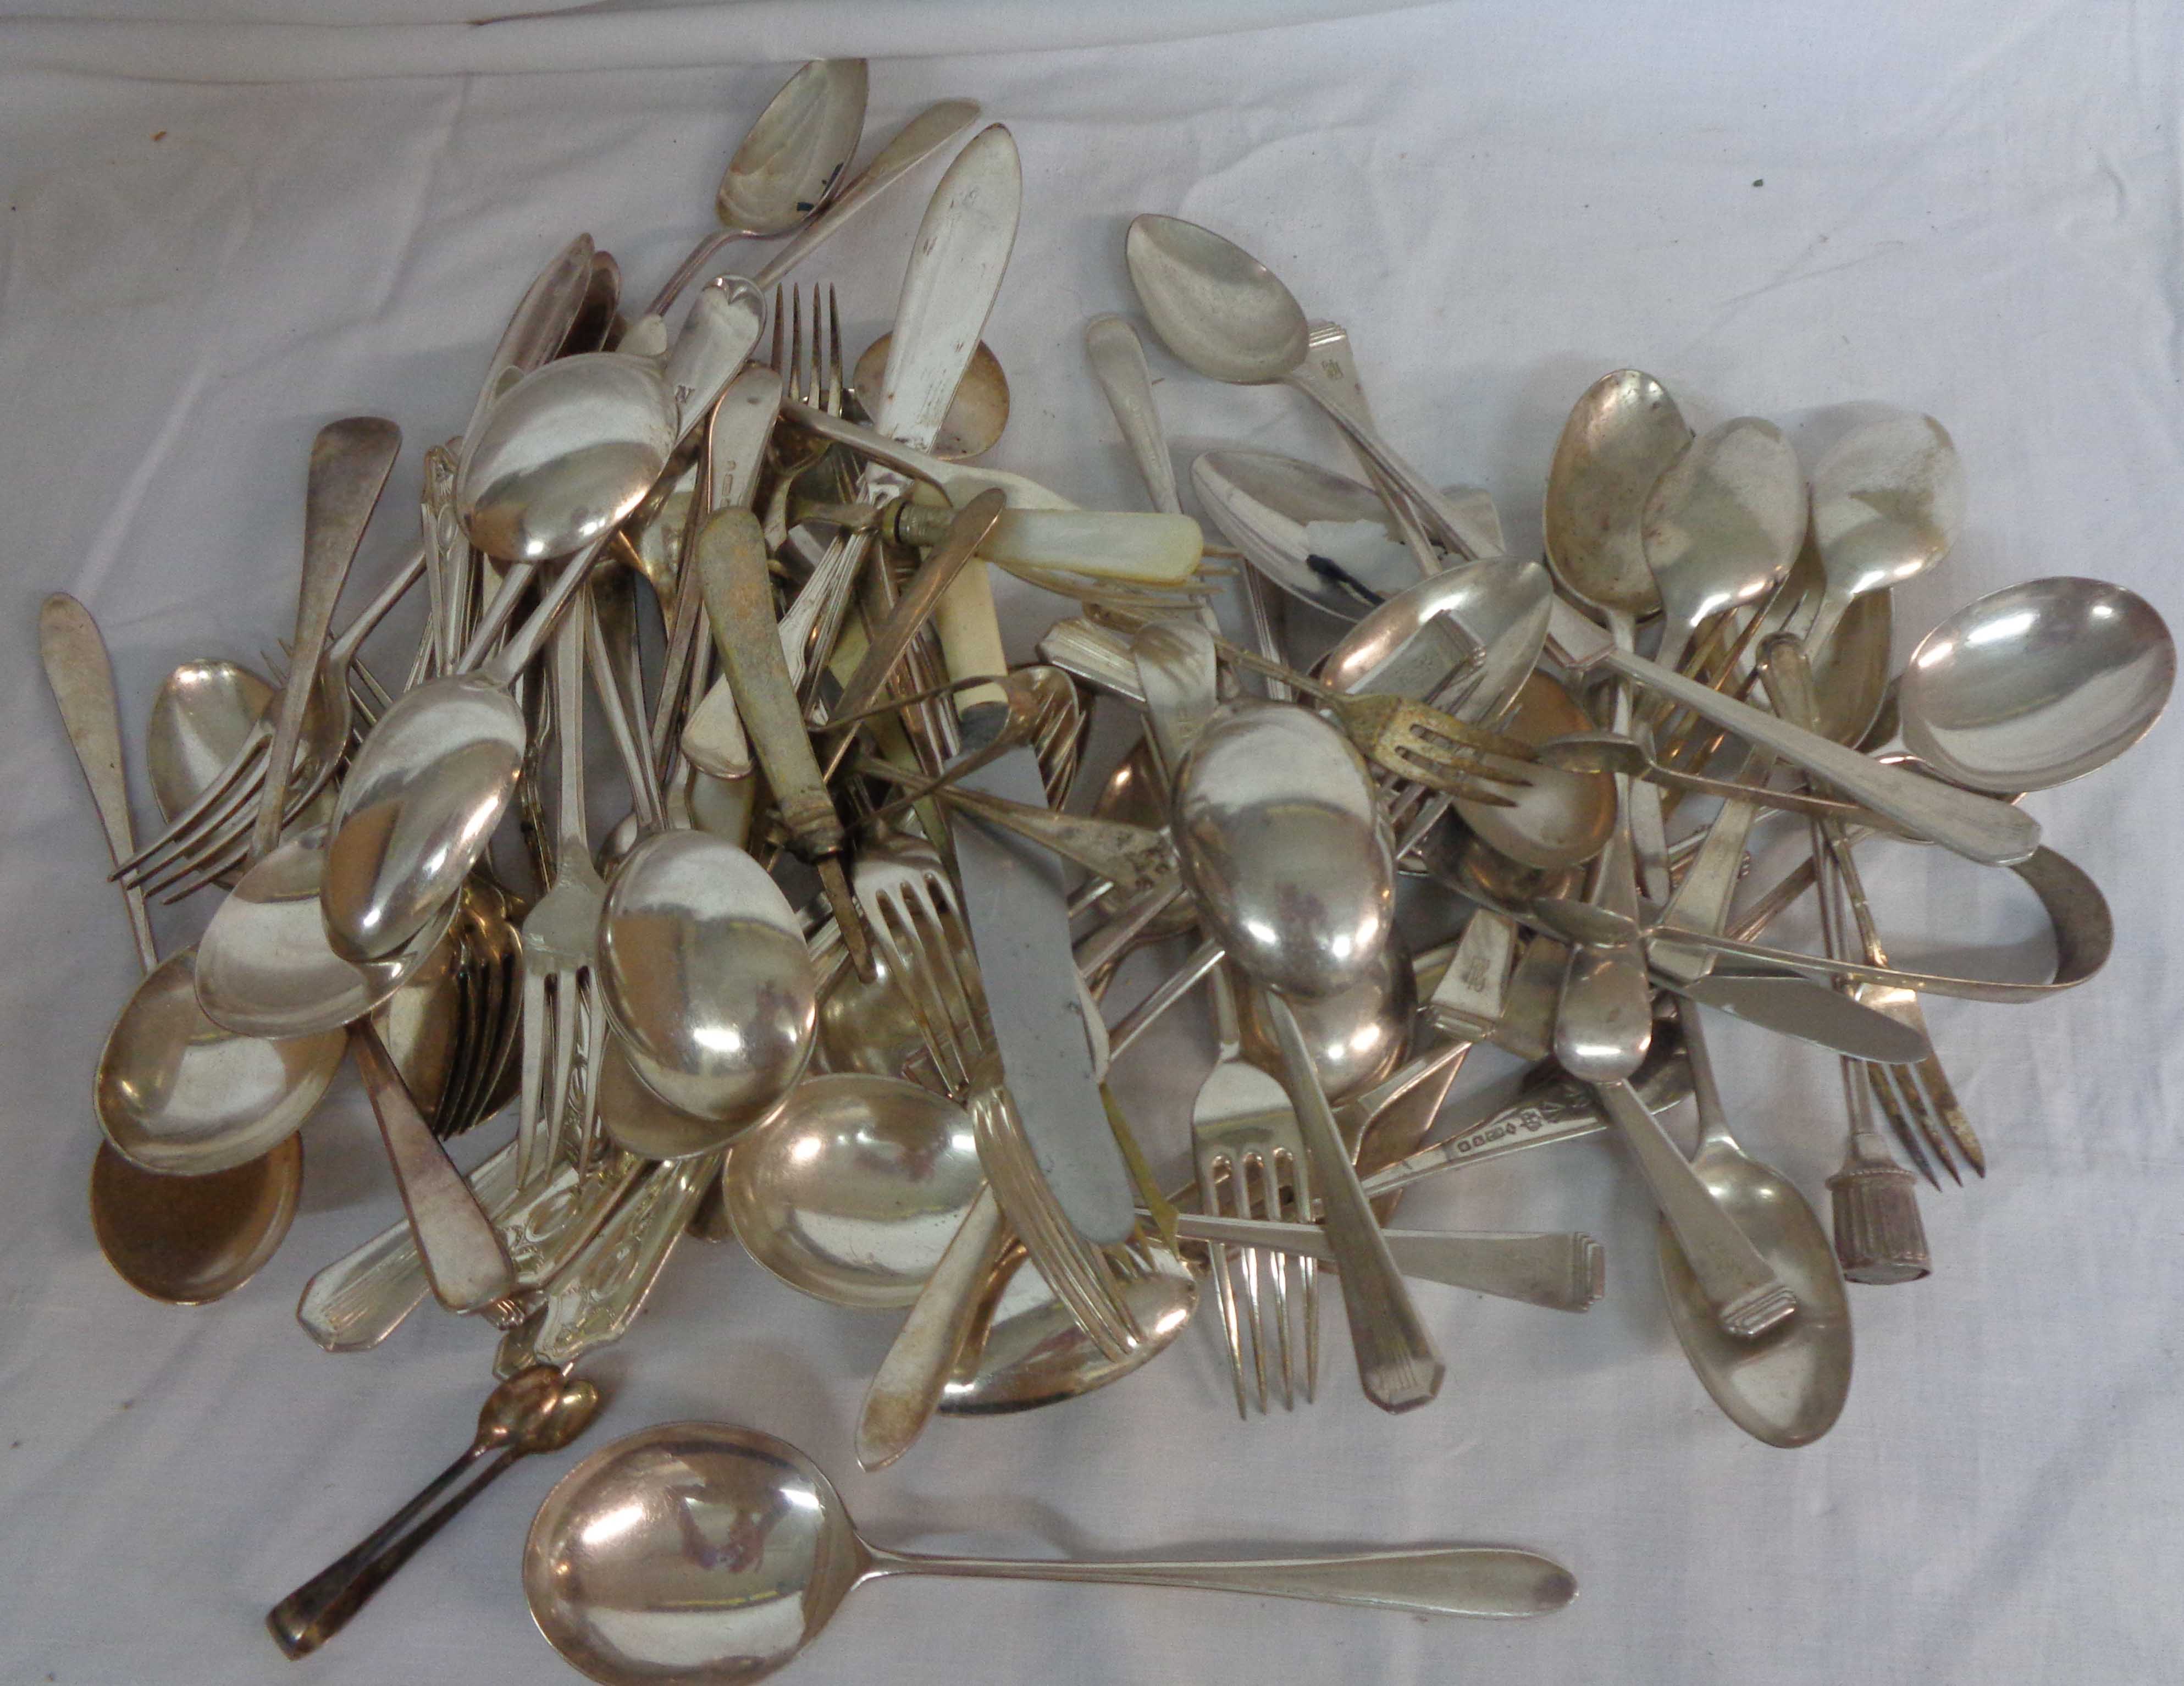 A box containing a quantity of assorted silver plated cutlery - various age, maker and design